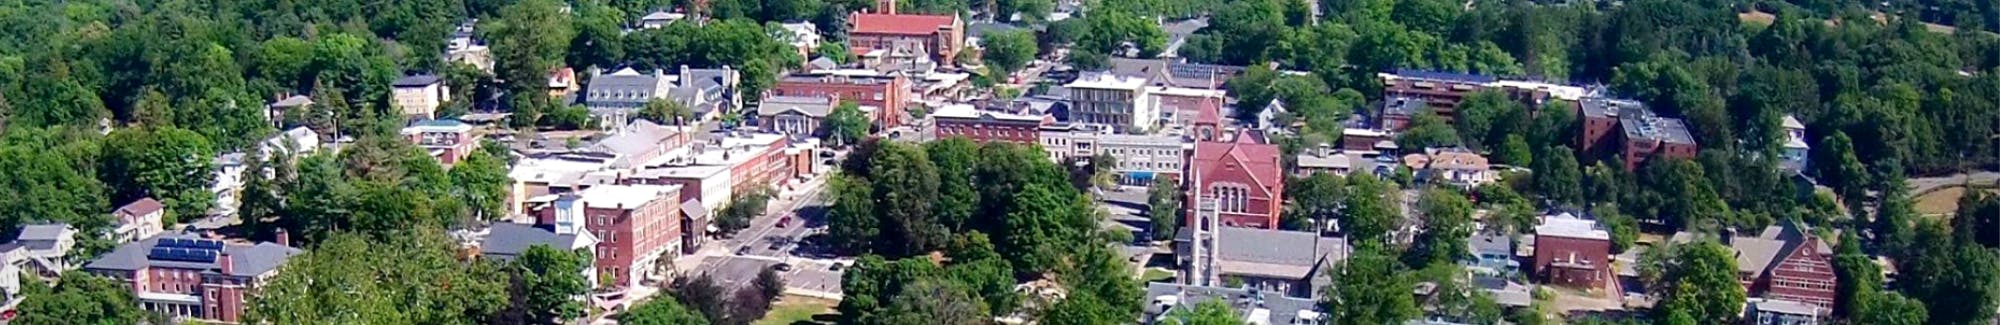 aerial drone image of Amherst Town Center with UMass in background